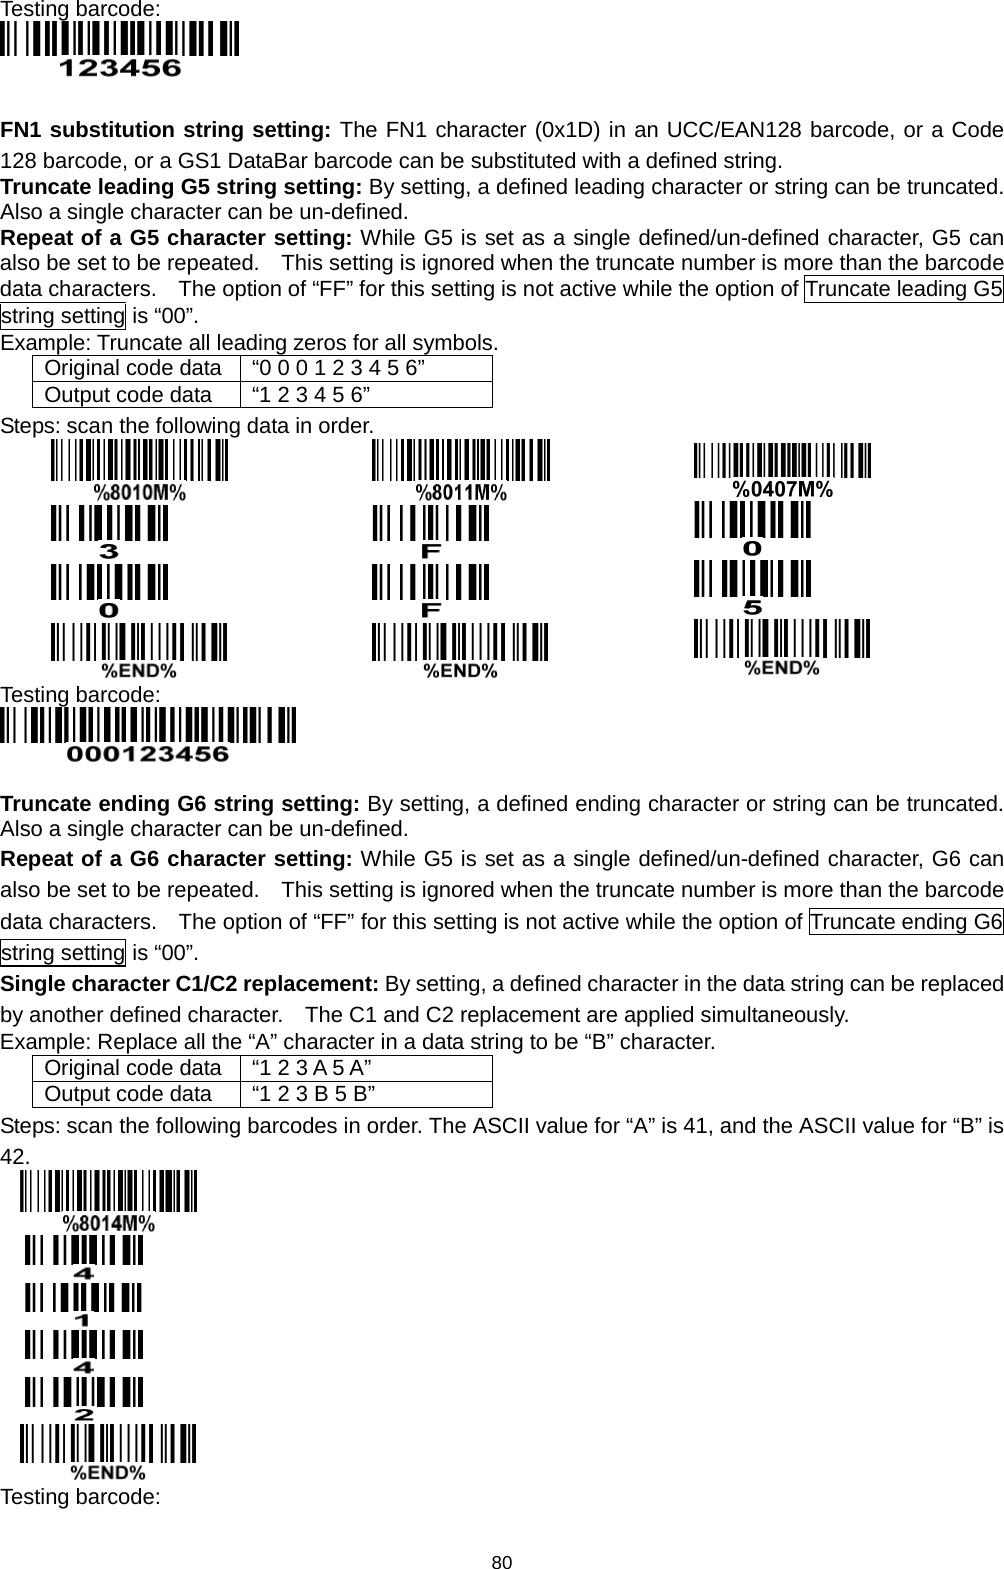 80 Testing barcode:   FN1 substitution string setting: The FN1 character (0x1D) in an UCC/EAN128 barcode, or a Code 128 barcode, or a GS1 DataBar barcode can be substituted with a defined string. Truncate leading G5 string setting: By setting, a defined leading character or string can be truncated.   Also a single character can be un-defined.   Repeat of a G5 character setting: While G5 is set as a single defined/un-defined character, G5 can also be set to be repeated.    This setting is ignored when the truncate number is more than the barcode data characters.    The option of “FF” for this setting is not active while the option of Truncate leading G5 string setting is “00”.   Example: Truncate all leading zeros for all symbols. Original code data “0 0 0 1 2 3 4 5 6” Output code data “1 2 3 4 5 6” Steps: scan the following data in order.            Testing barcode:   Truncate ending G6 string setting: By setting, a defined ending character or string can be truncated.   Also a single character can be un-defined.   Repeat of a G6 character setting: While G5 is set as a single defined/un-defined character, G6 can also be set to be repeated.    This setting is ignored when the truncate number is more than the barcode data characters.    The option of “FF” for this setting is not active while the option of Truncate ending G6 string setting is “00”. Single character C1/C2 replacement: By setting, a defined character in the data string can be replaced by another defined character.    The C1 and C2 replacement are applied simultaneously. Example: Replace all the “A” character in a data string to be “B” character. Original code data “1 2 3 A 5 A” Output code data “1 2 3 B 5 B” Steps: scan the following barcodes in order. The ASCII value for “A” is 41, and the ASCII value for “B” is 42.       Testing barcode: 